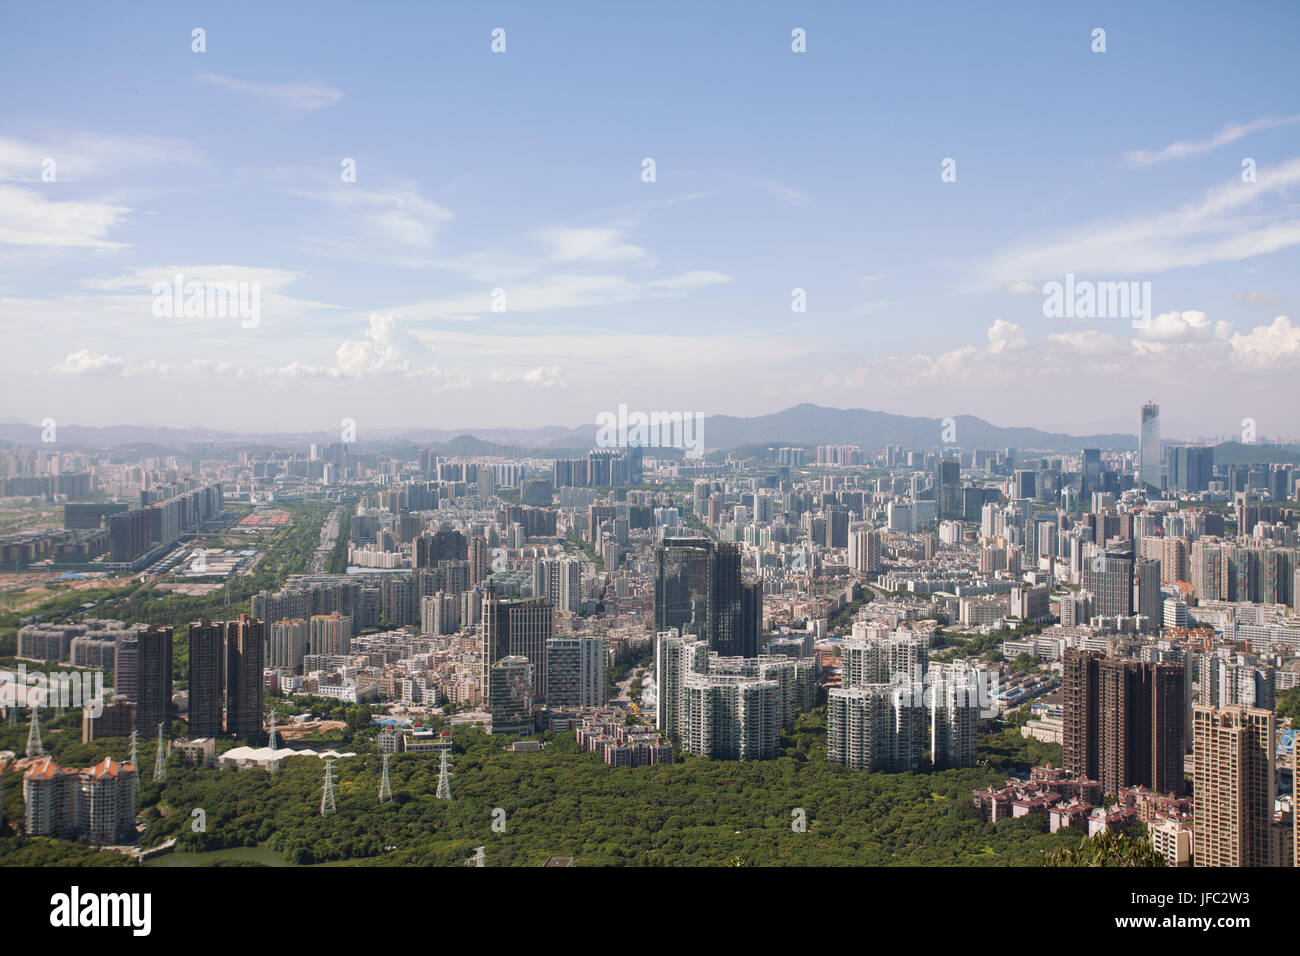 City Landscape; Skyscrapers, office and apartment buildings, Baoan and Nanshan district, Shenzhen, Guangdong province, People's republic of China; Stock Photo